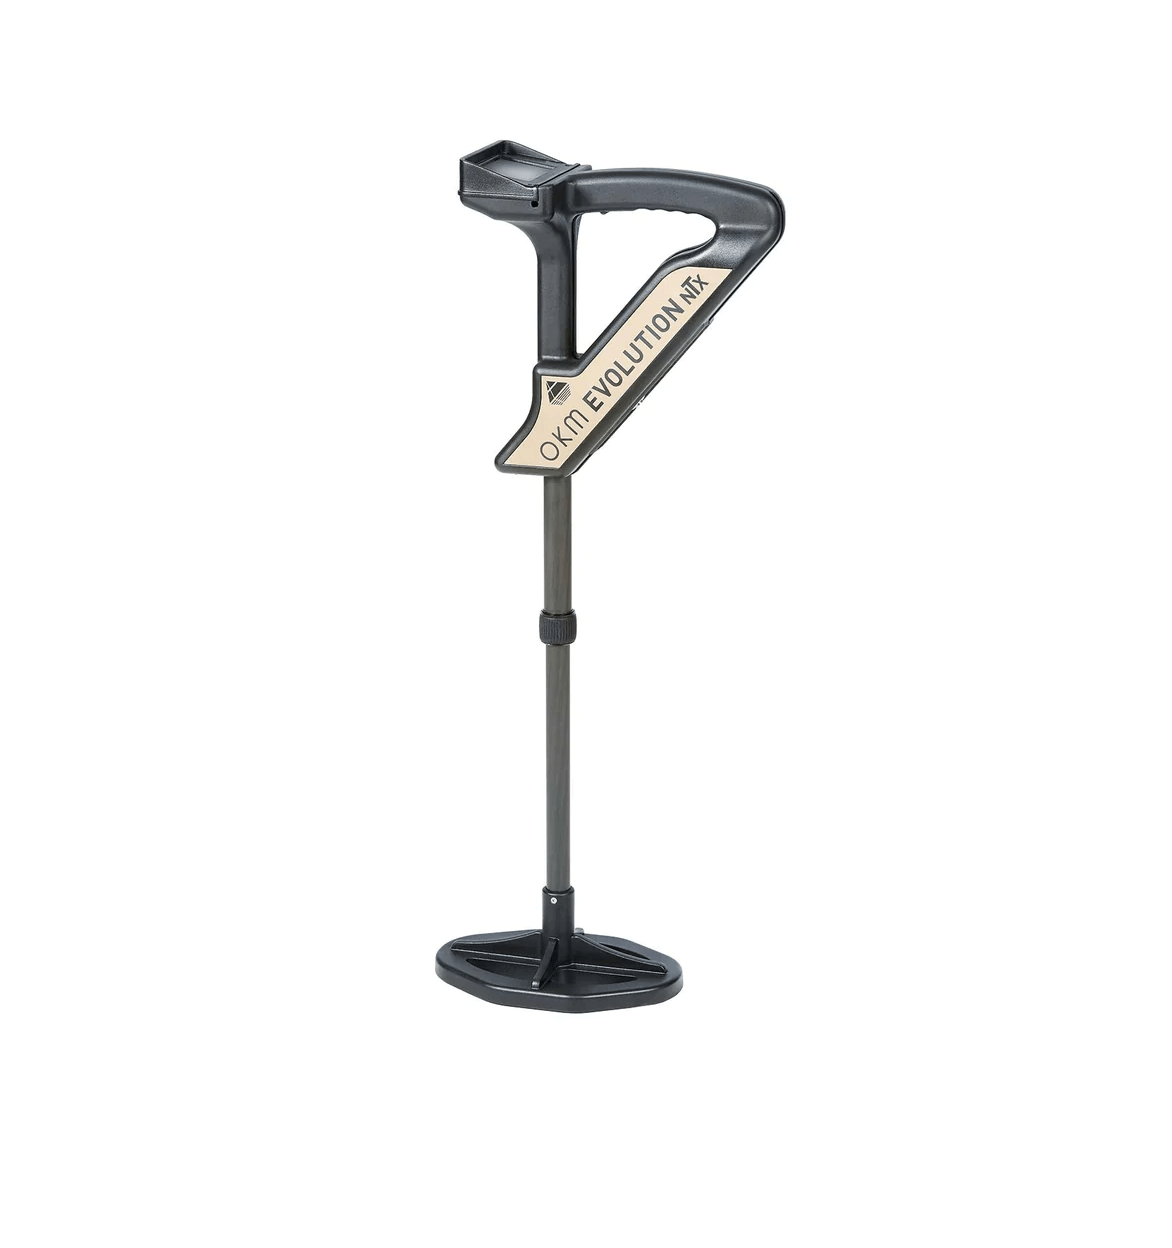 A picture on a white background of the OKM Evolution NTX metal detector